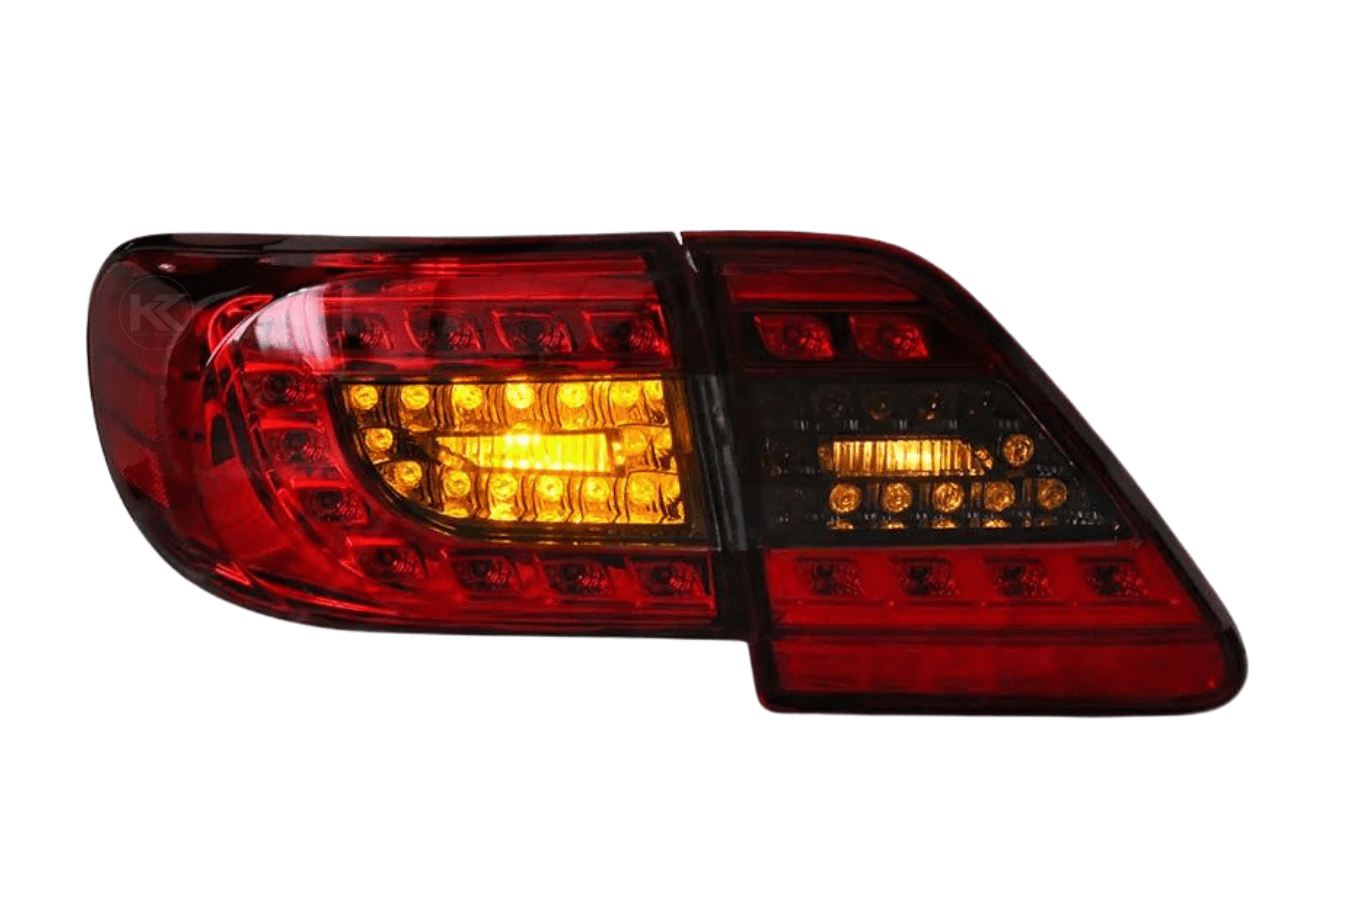 Toyota Corolla 10th Gen (E140 Wide-Body) Facelift LED Tail Lights (2011 - 2013) - K2 Industries